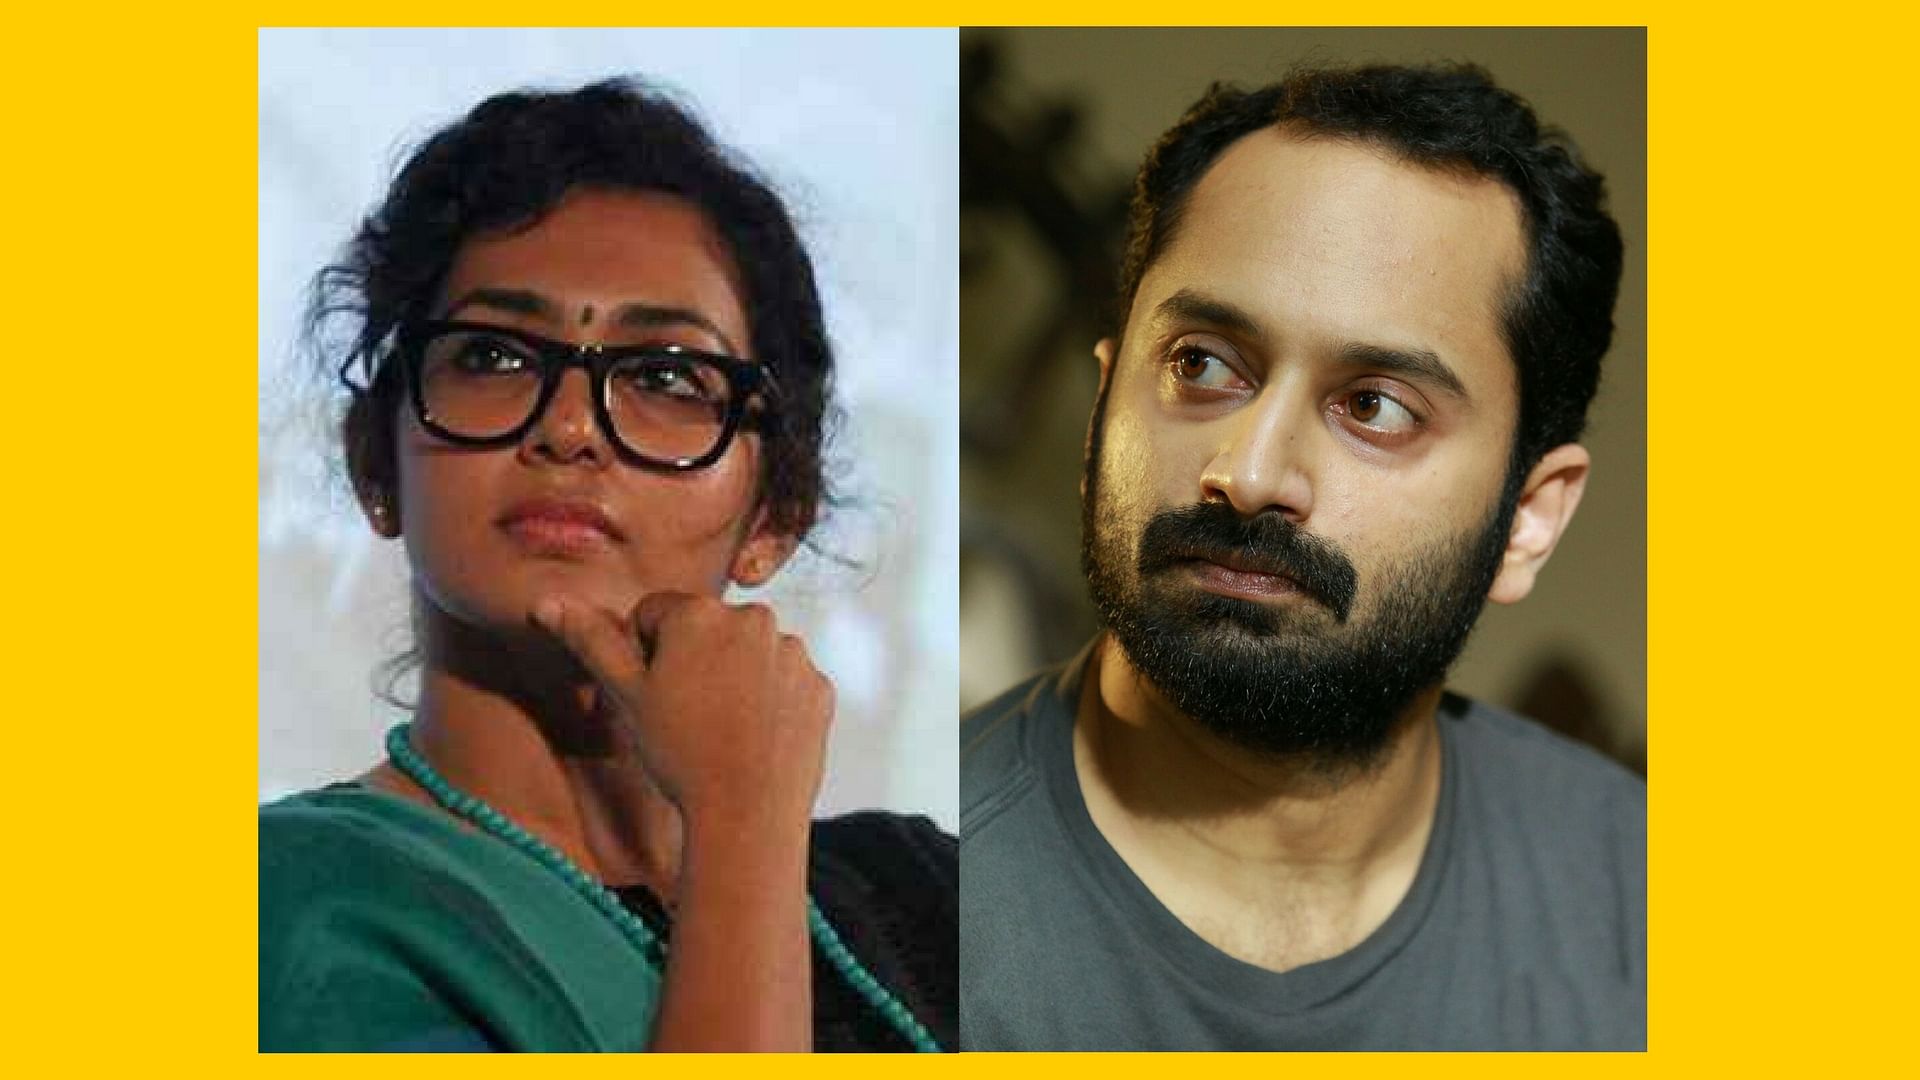 Parvathy and Fahadh Faasil told the media that they were upset about the discrimination in the award ceremony.